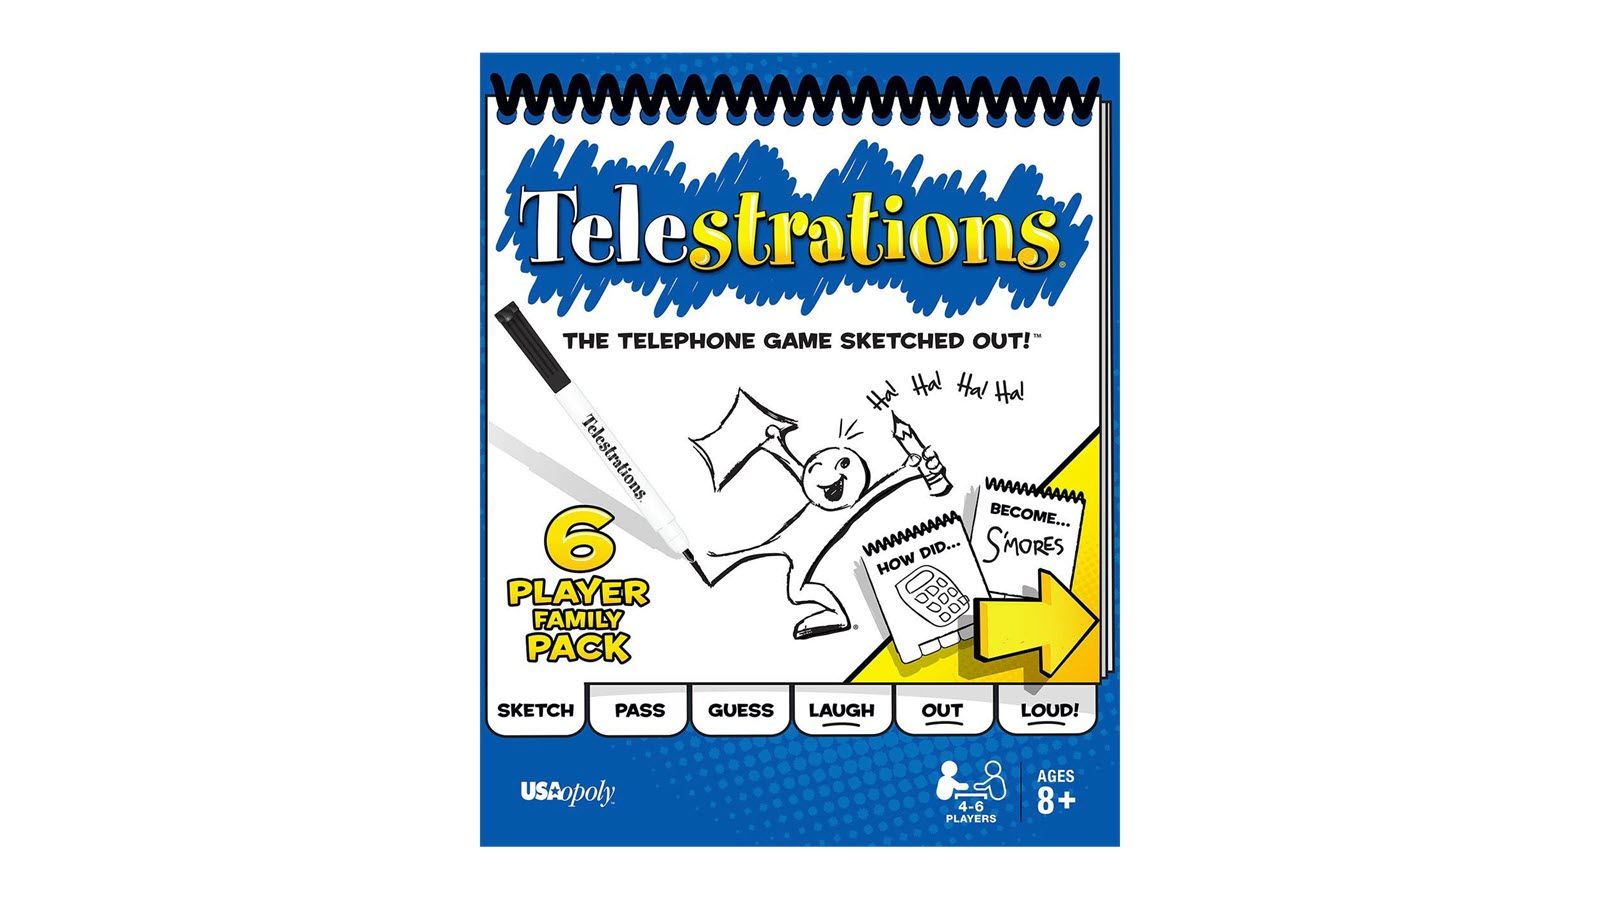 The Telestrations board game box.